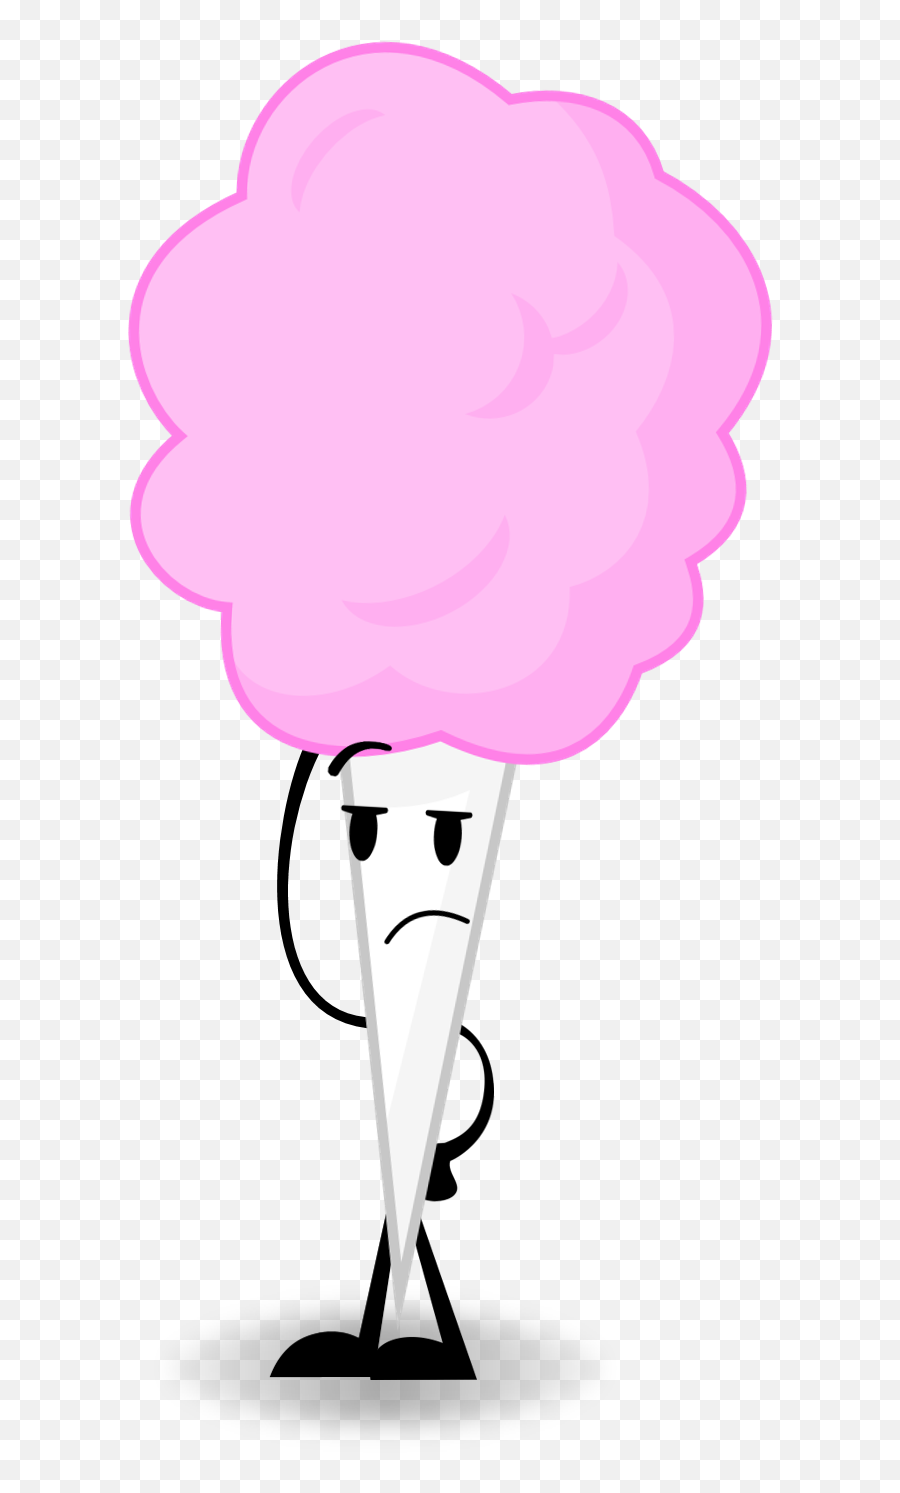 Cotton Candy - Object Connects Cotton Candy Png,Cotton Candy Png